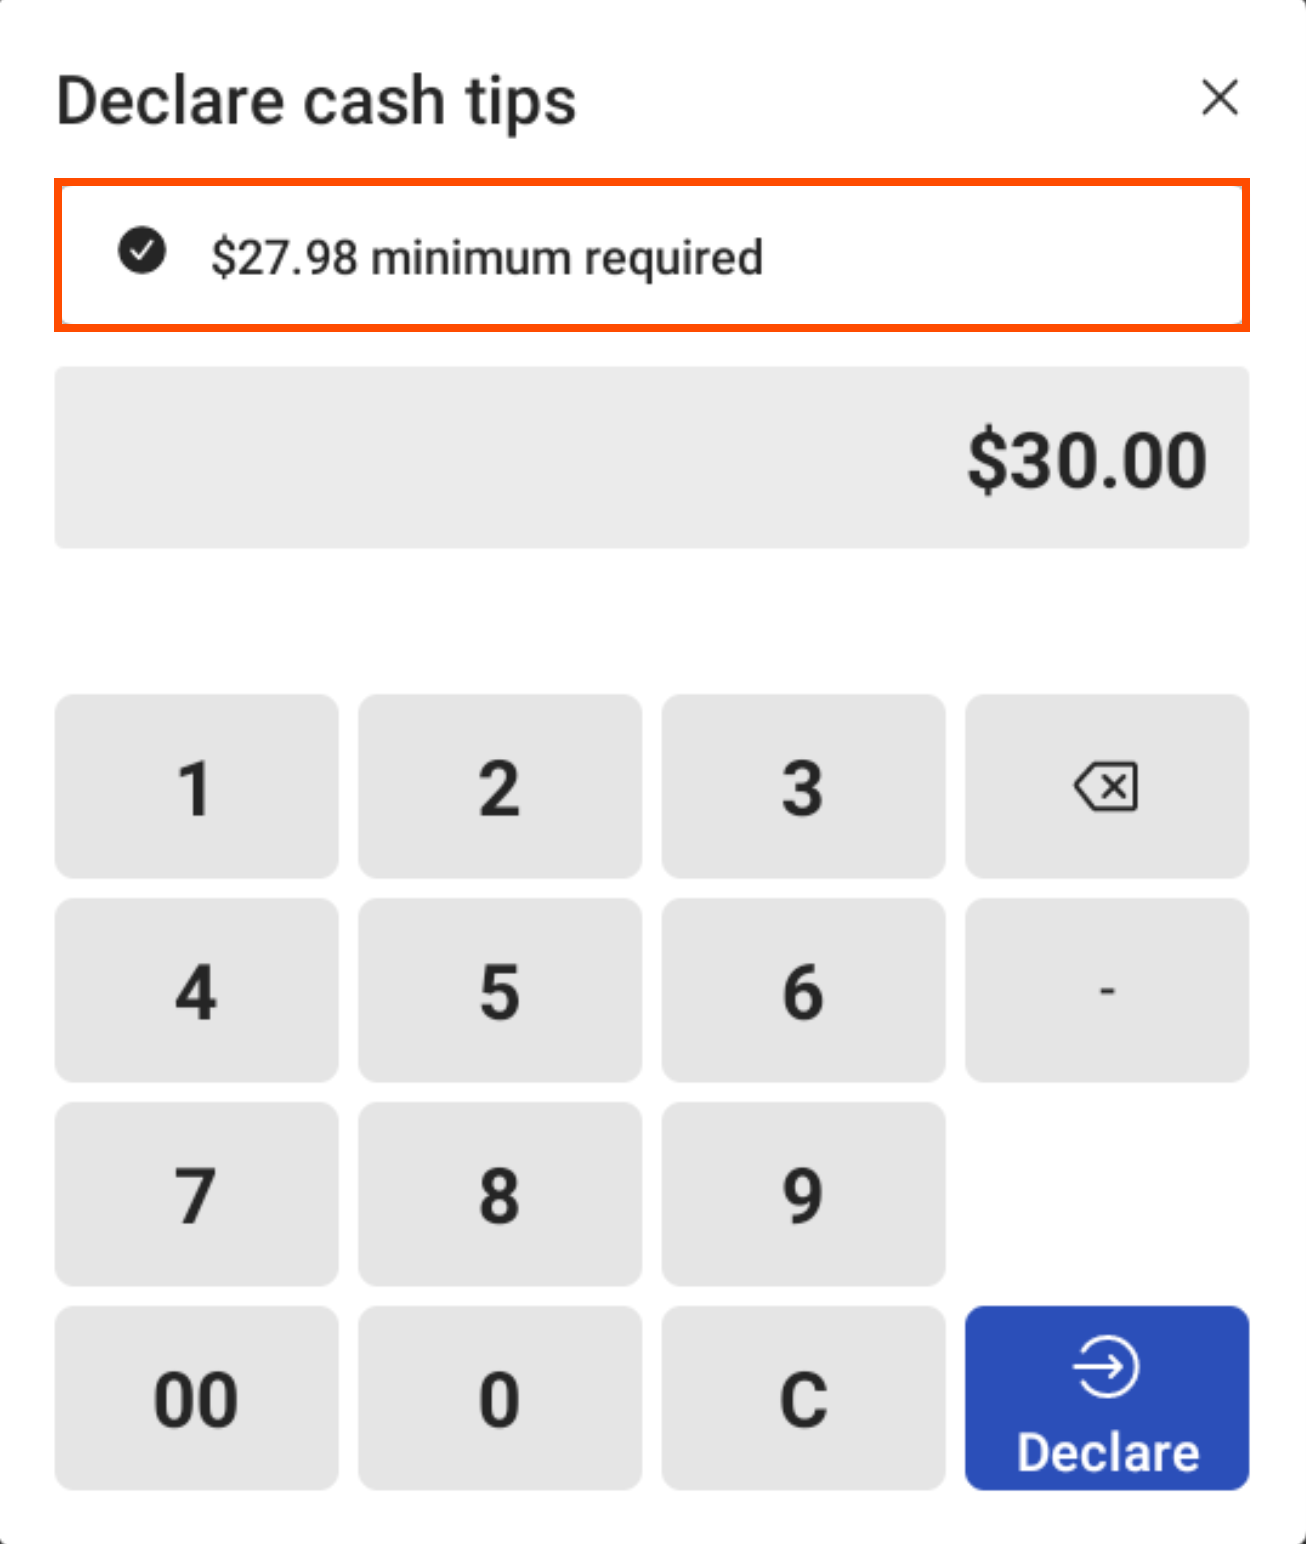 The Declare cash tips dialog box pointing out the minimum tip amount.